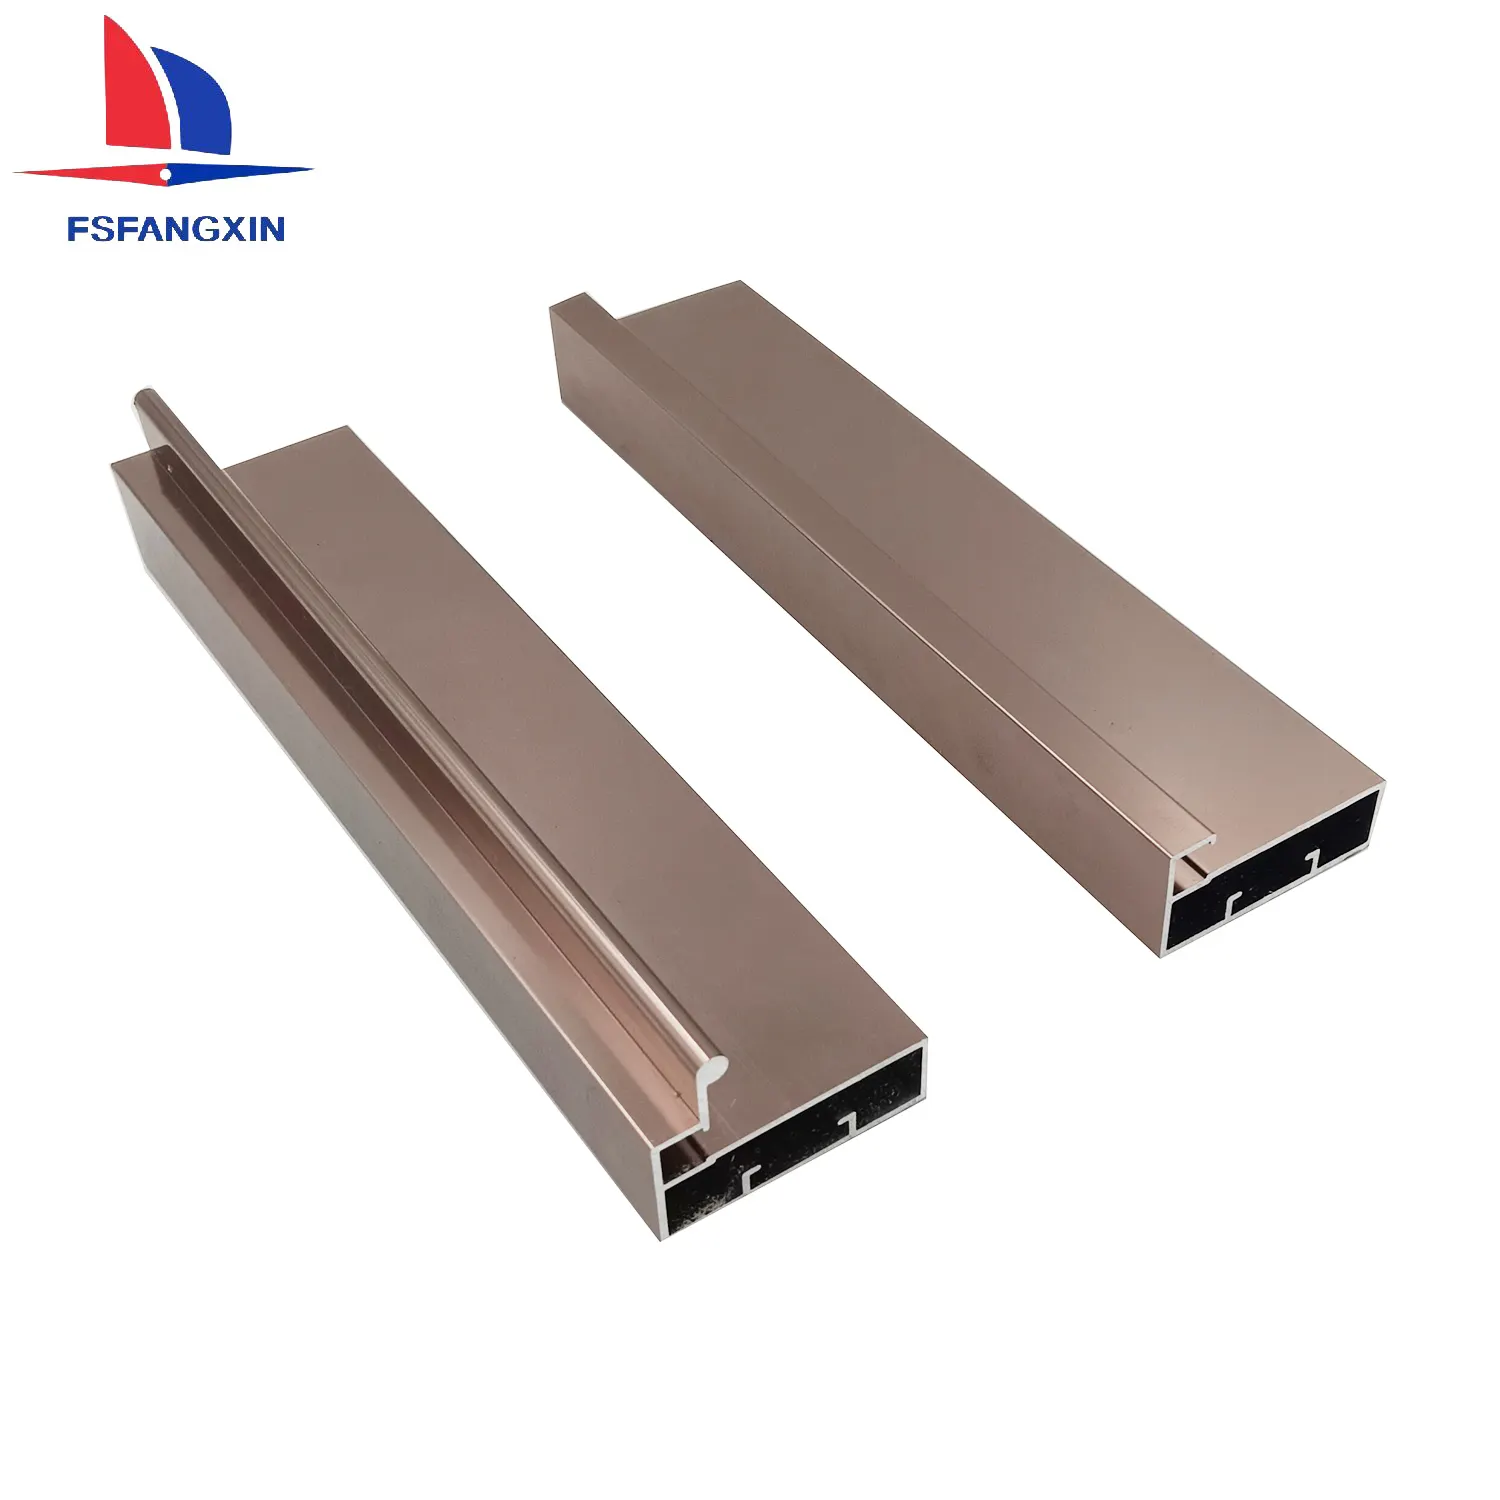 High Quality Customized Aluminum Extrusion Profile Aluminum Frame Profile for Windows Glass Door and Kitchen Cabinet